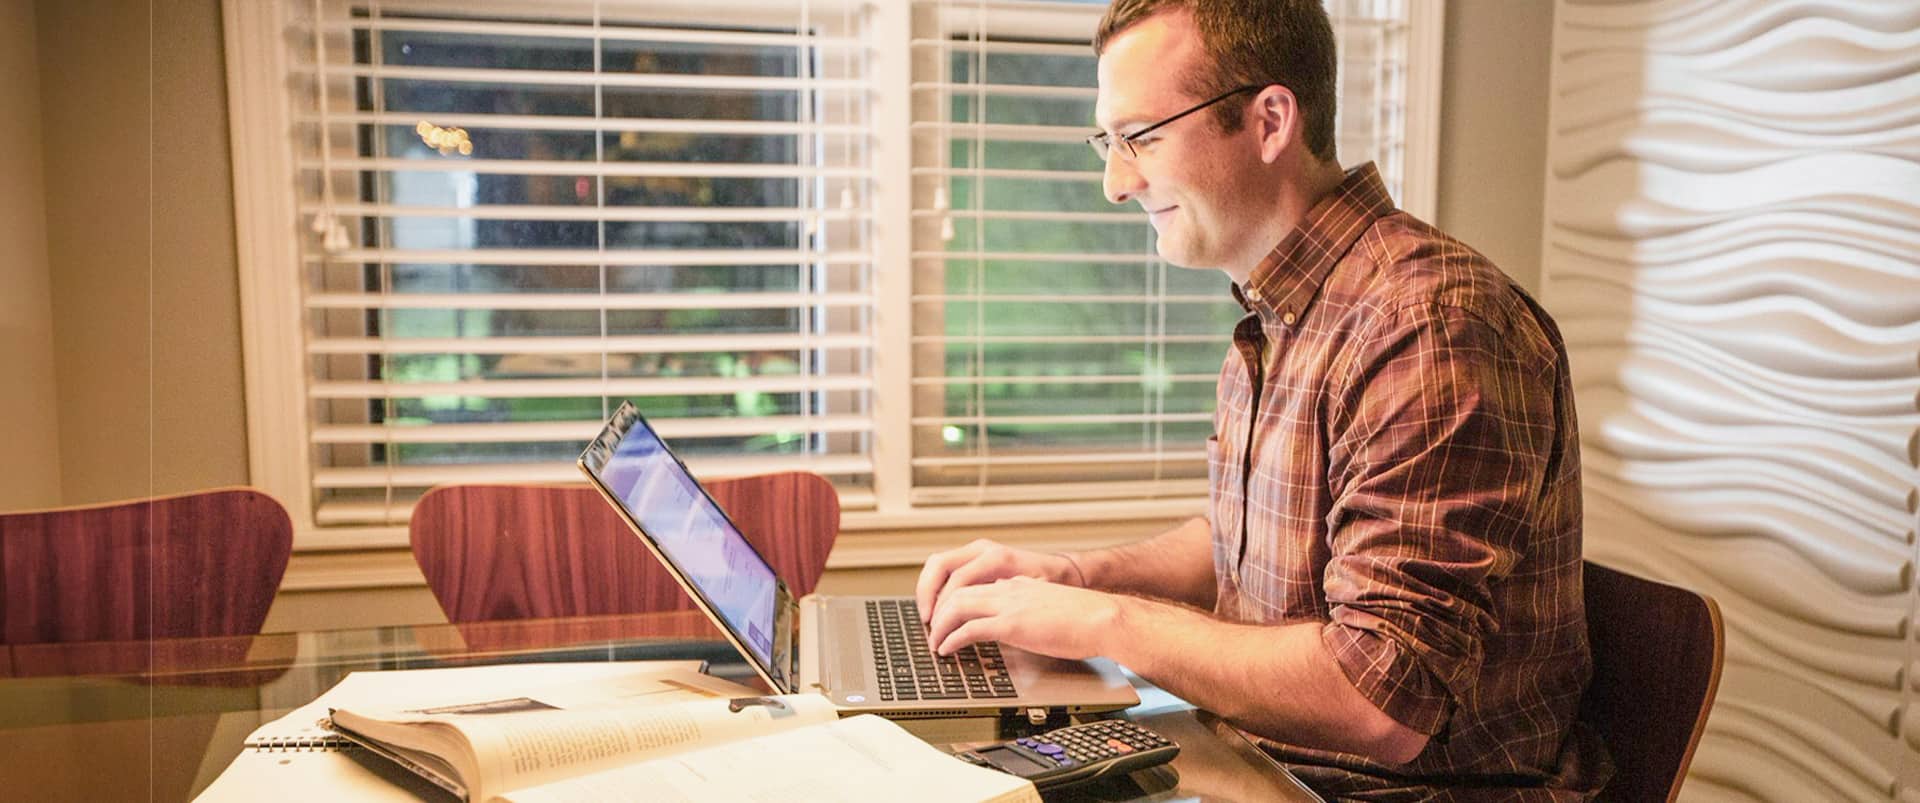 Chris Eldridge, who earned his degree from SNHU in 2015, wearing a plaid shirt, sitting at a glass table, typing on a laptop with a scientific calendar and open notebooks and text books beside him.